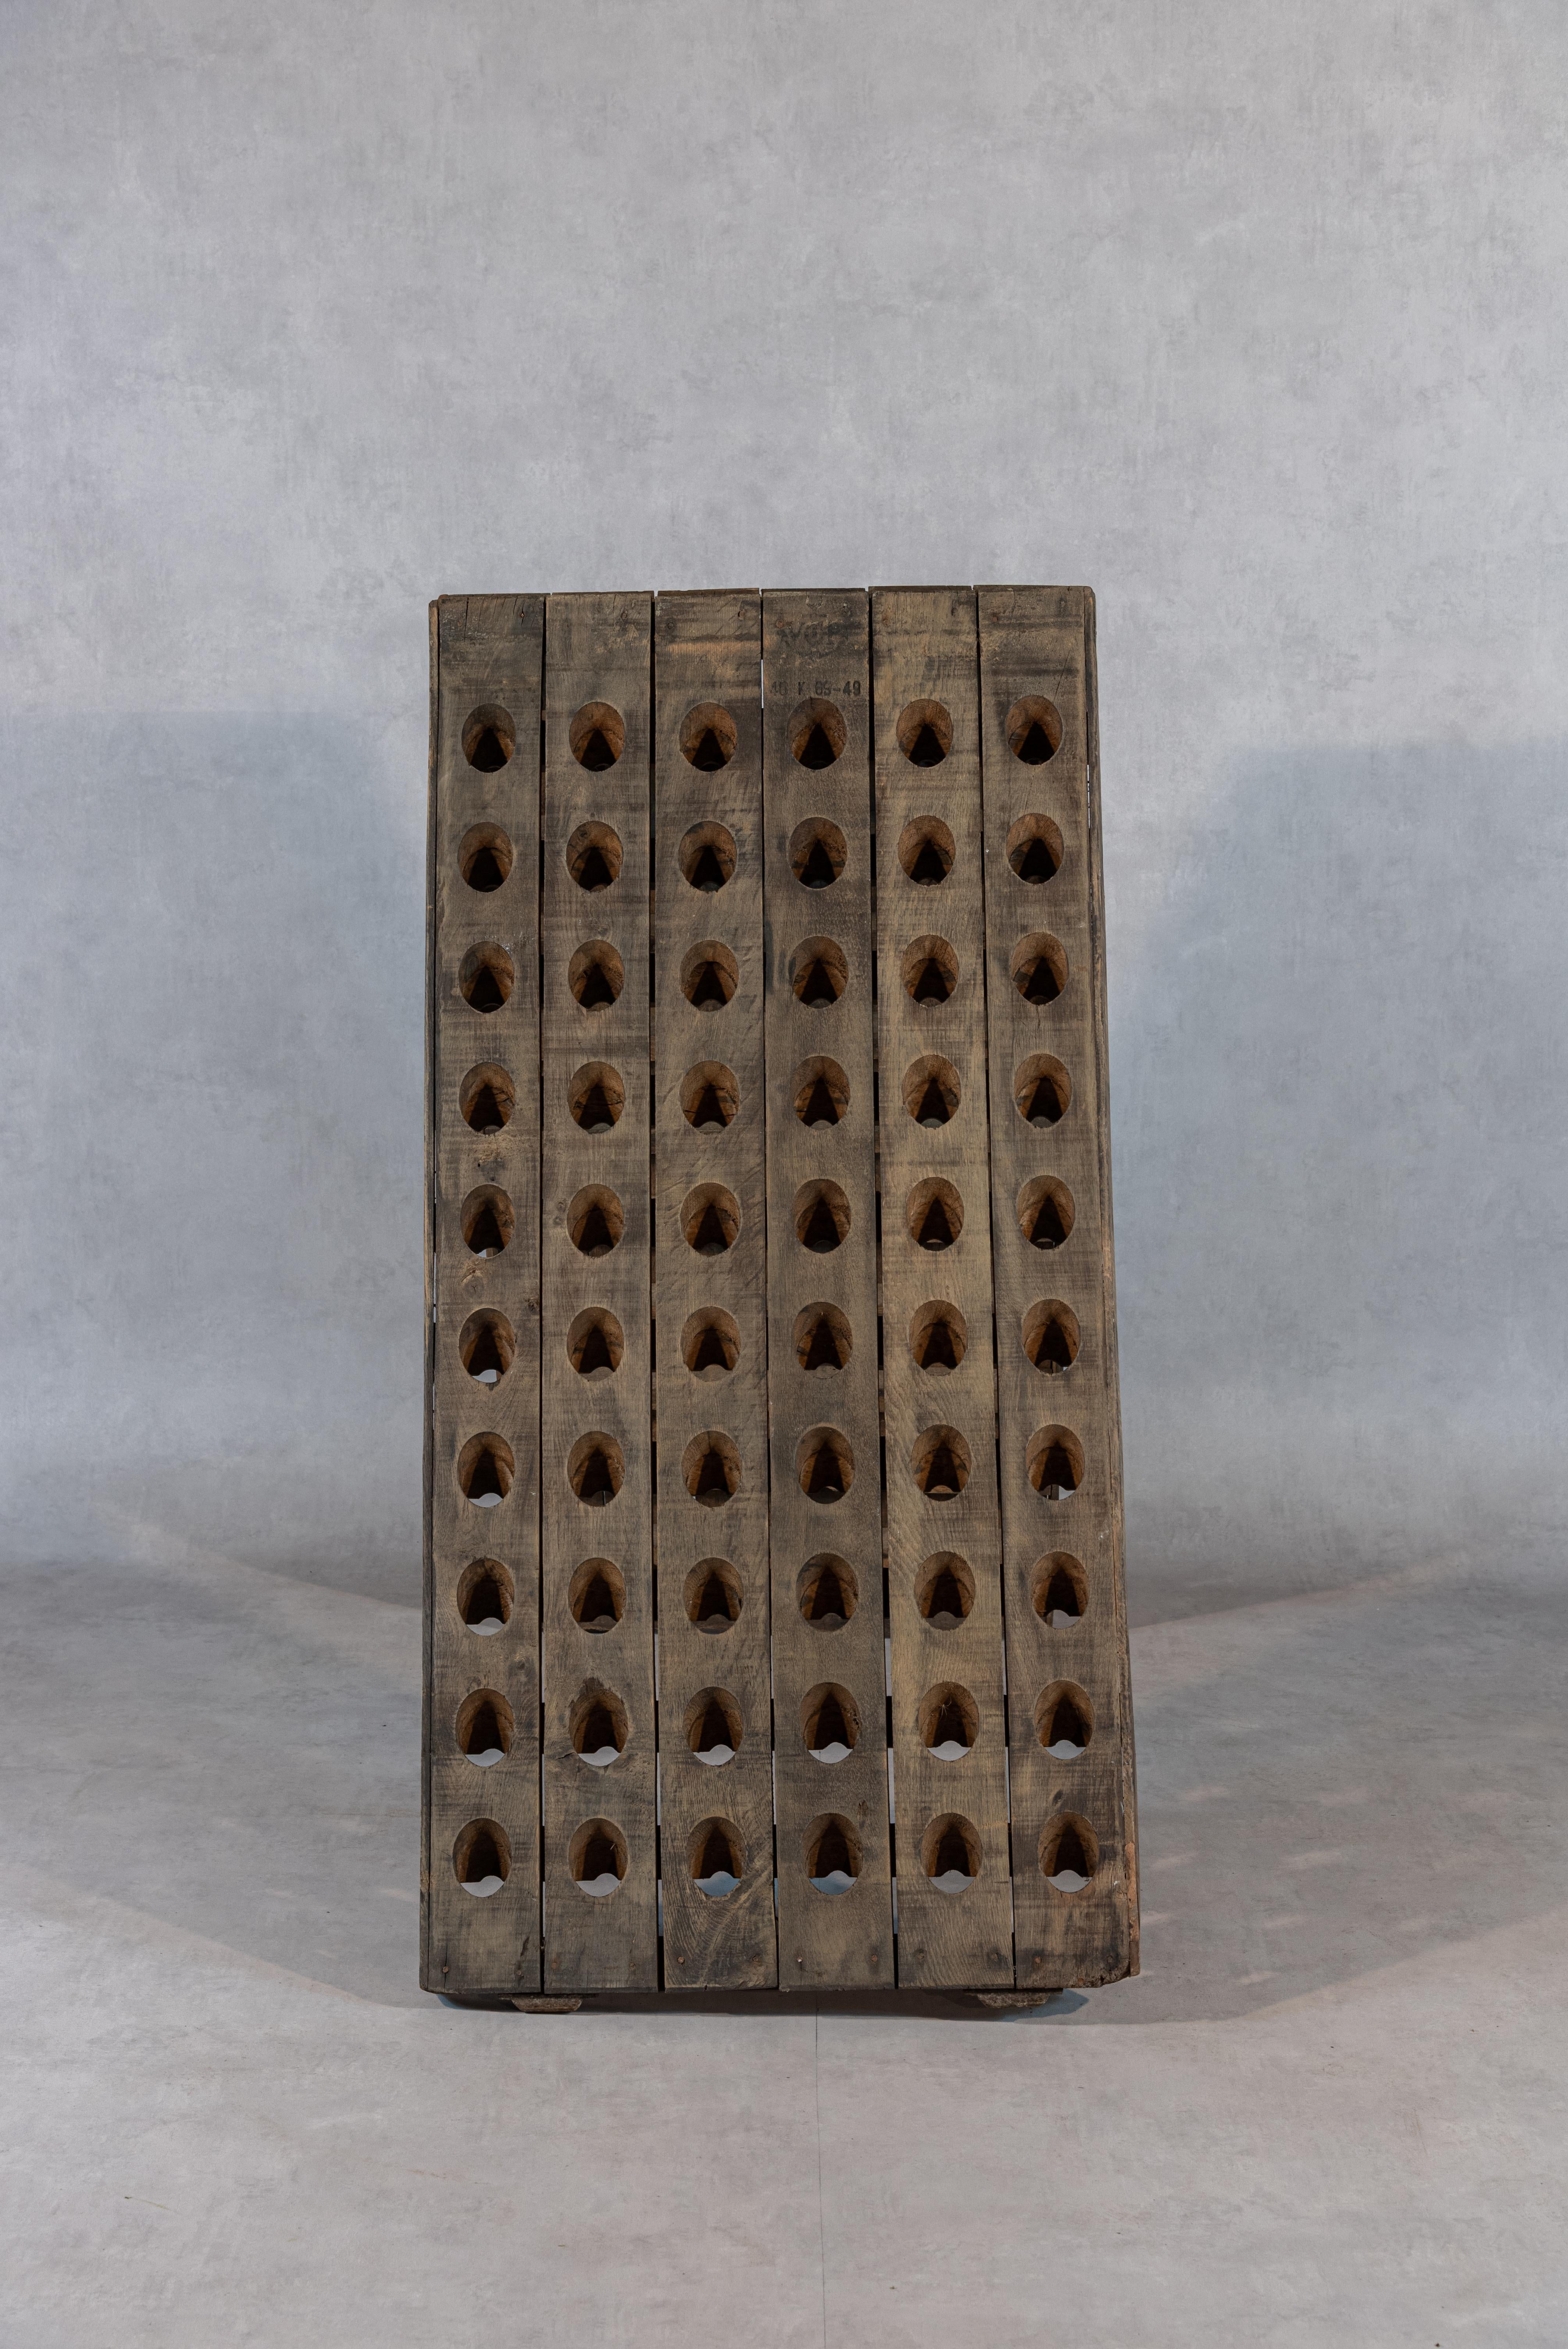 This stunning 19th-century French champagne riddler or wine rack is a true masterpiece that exudes the charm and appeal of a French chateau. With a capacity for 120 bottles, it is both practical and beautiful, making it the perfect addition to any